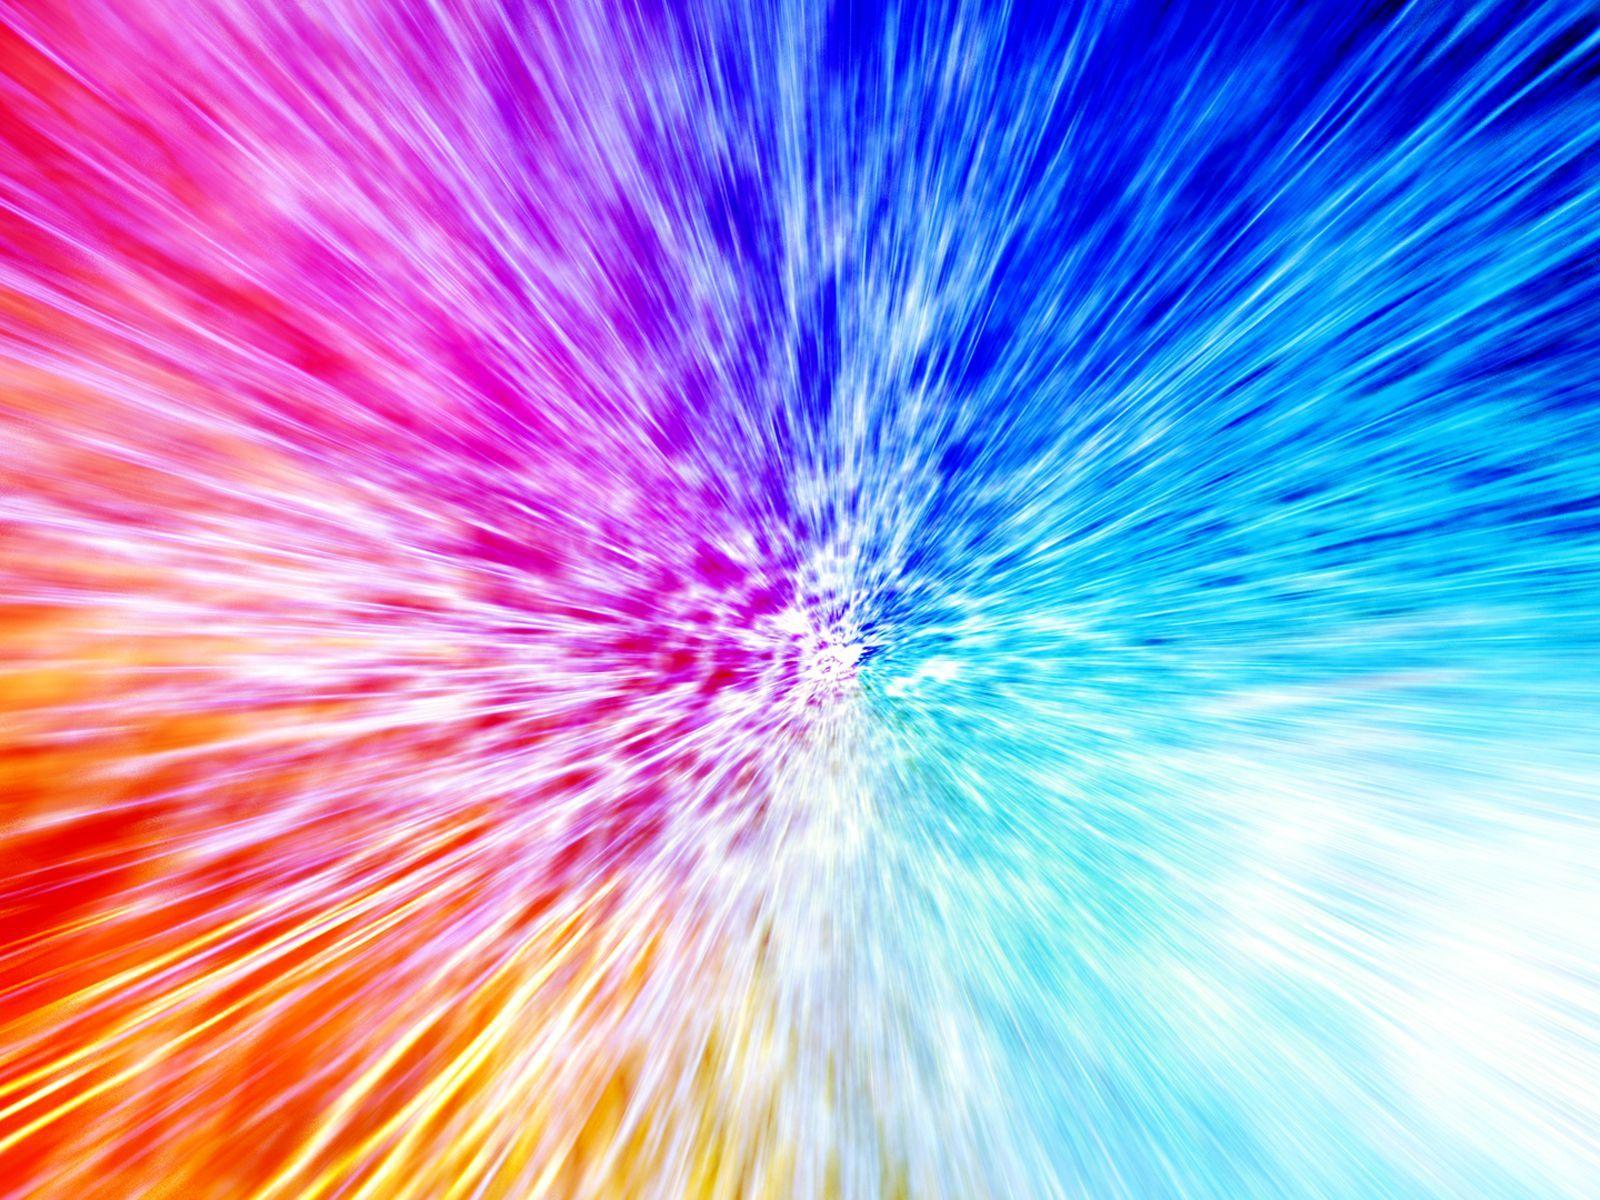 awesome colors background Wallpaper. Interesting Stuff to Me